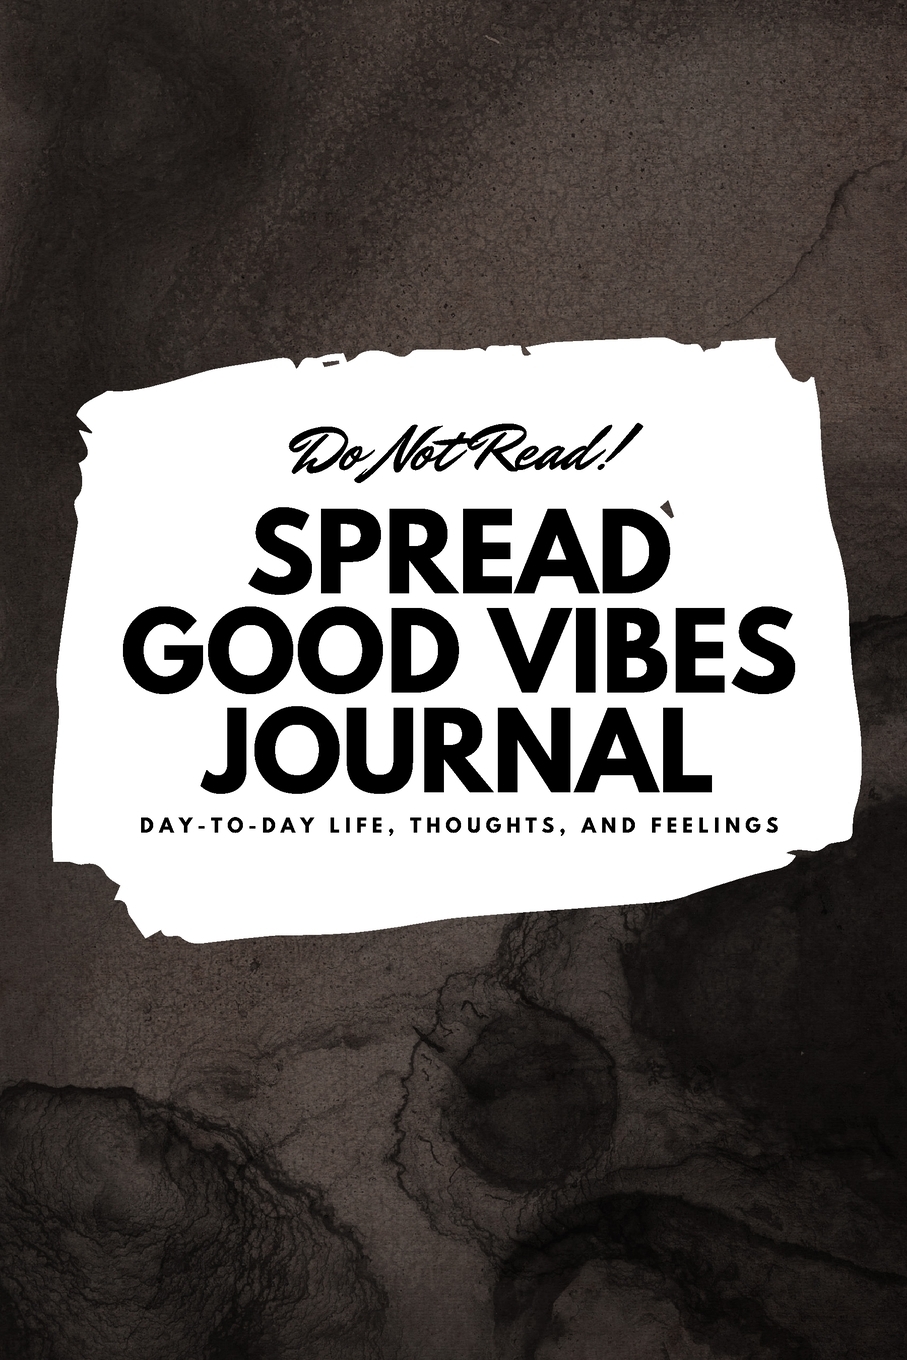 6x9 Blank Journal: Do Not Read! Spread Good Vibes Journal - Small Blank Journal - 6x9 Blank Journal (Softcover Journal / Notebook / Sketchbook / Diary) (Series #22) (Paperback) - image 1 of 1